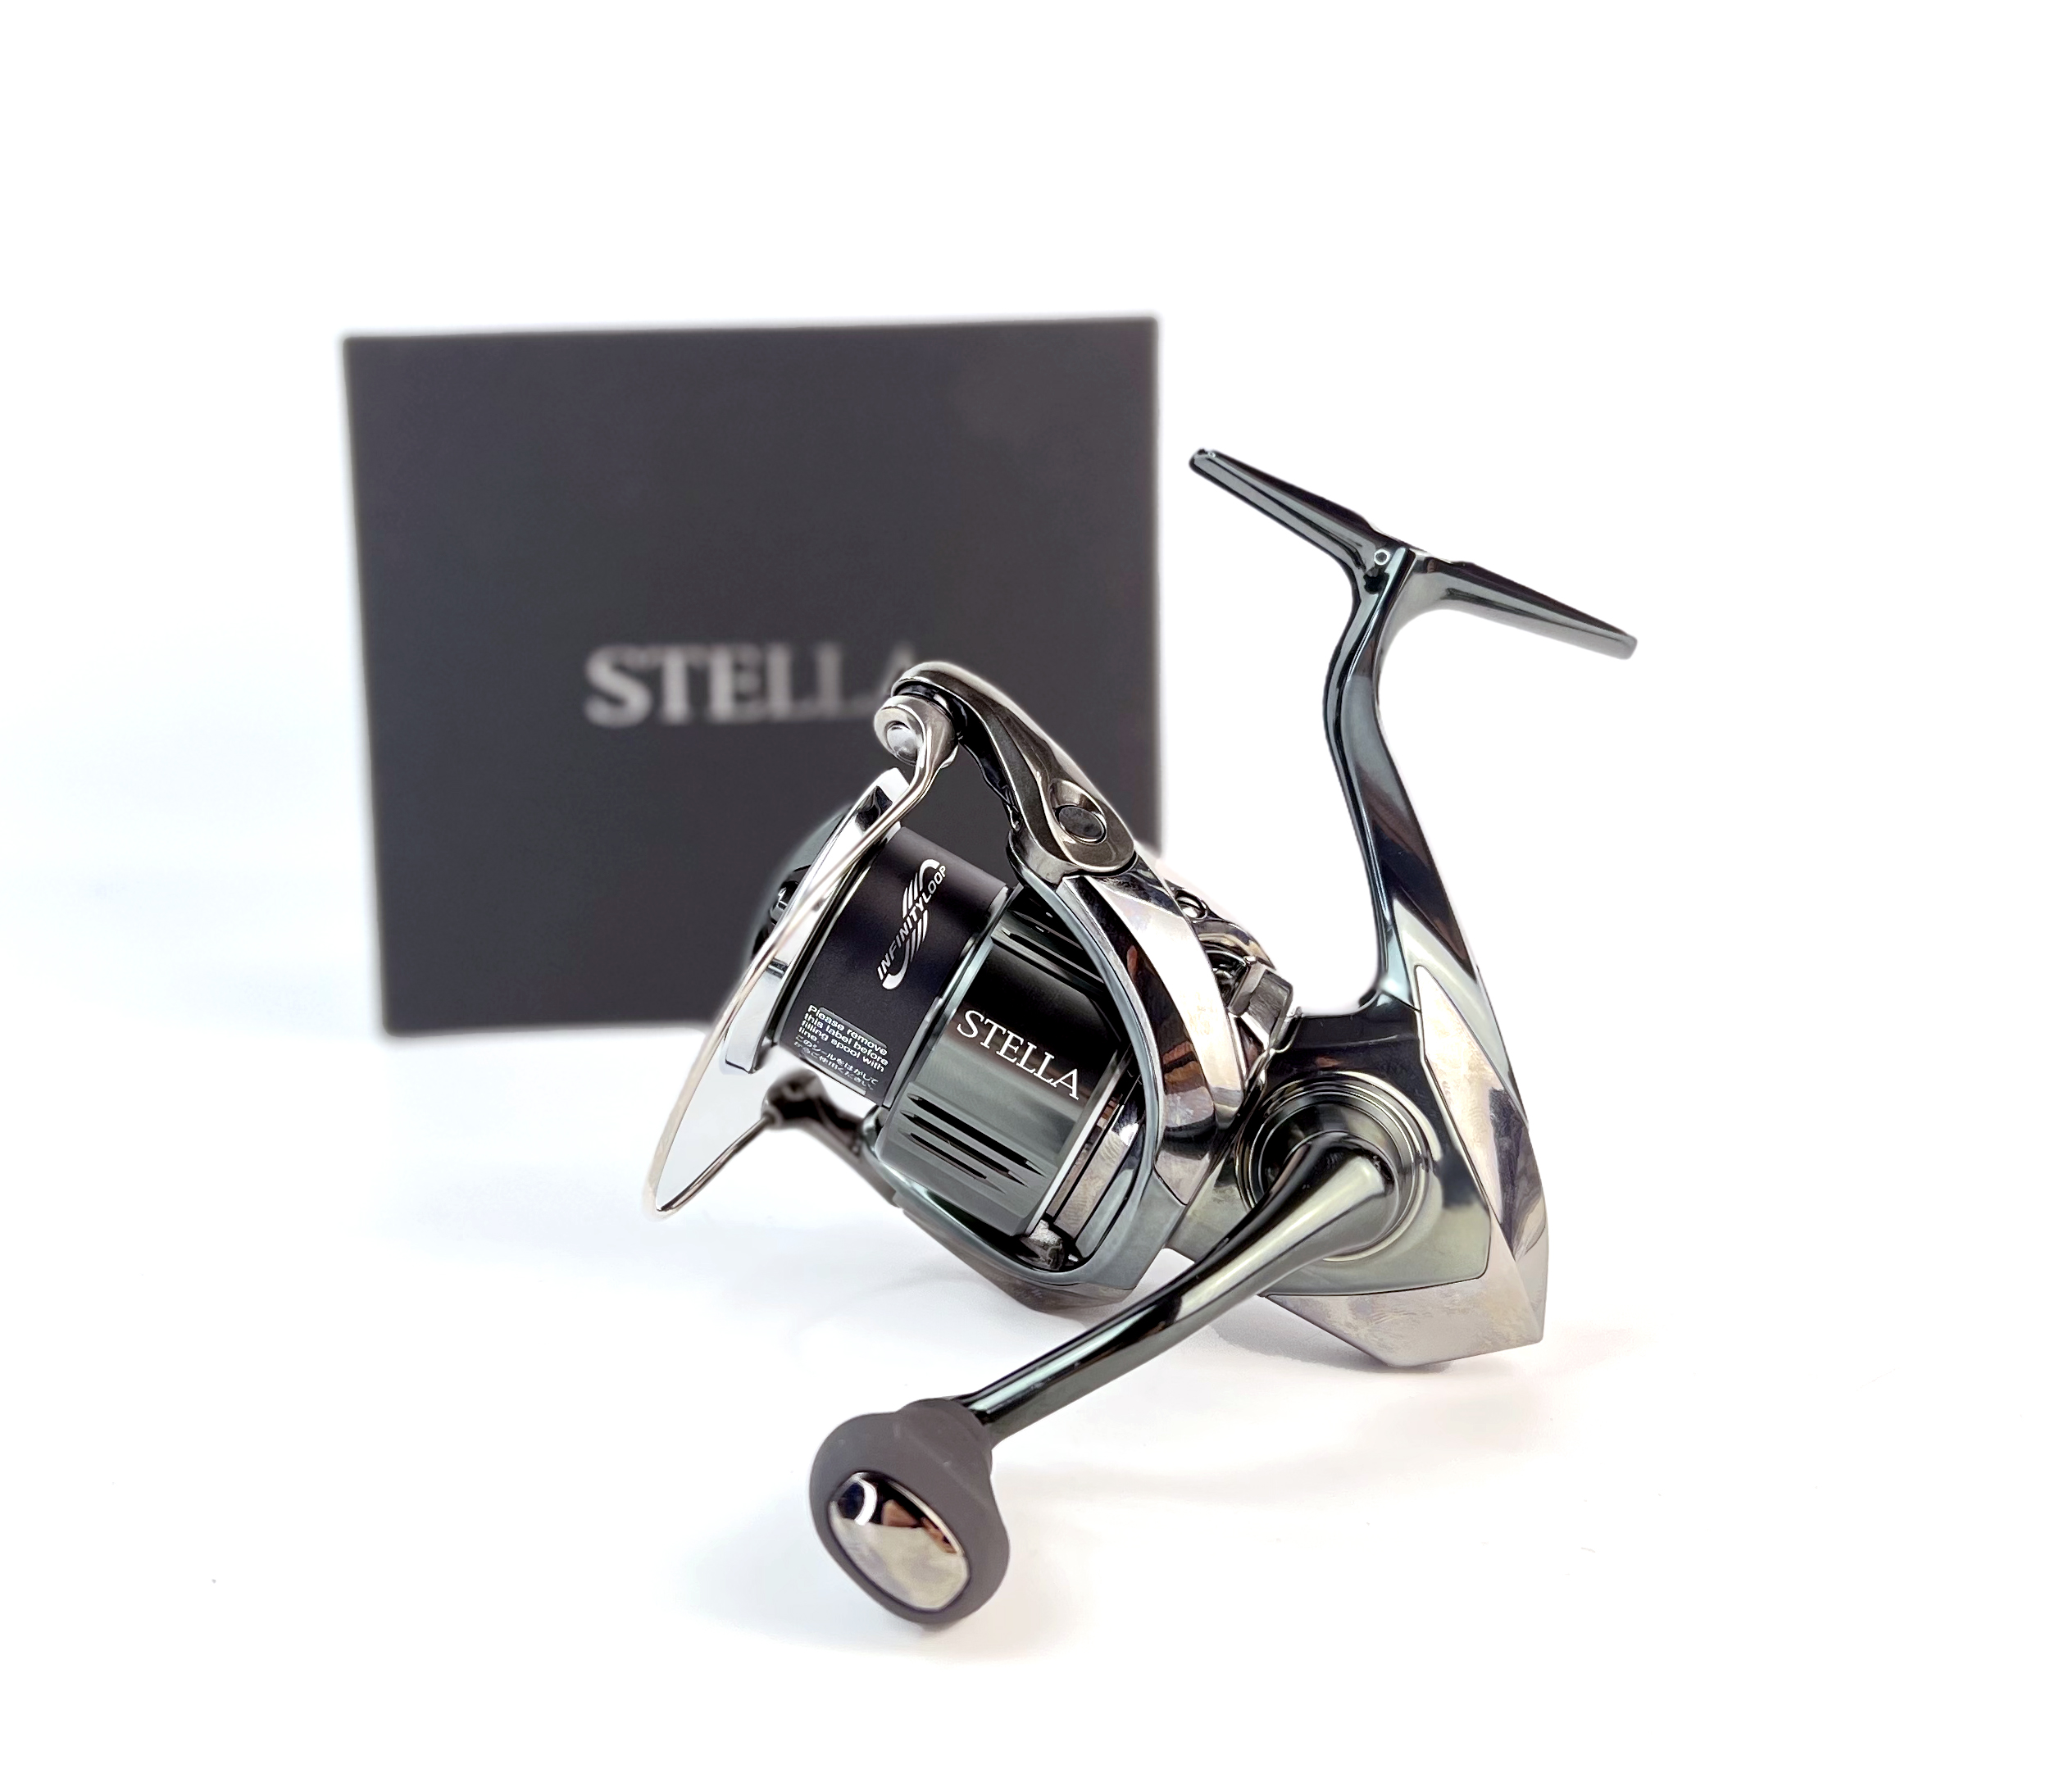 Shimano Stella Fk Spinning Reel Glasgow Angling Centre